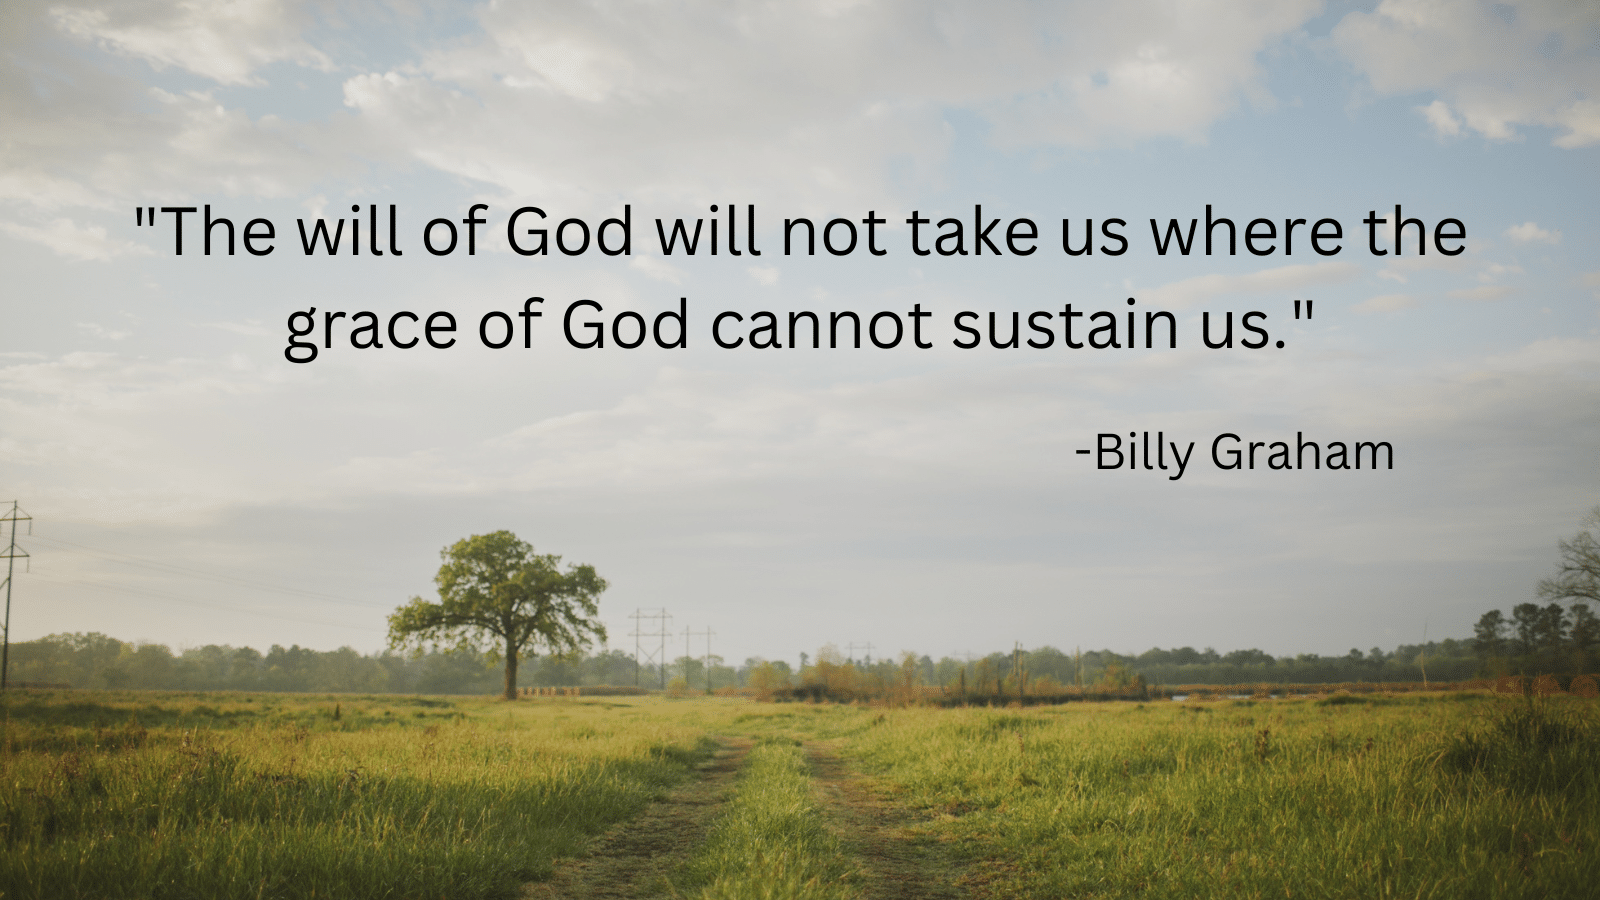 Dirt road with tree in the distance and Billy Graham quote